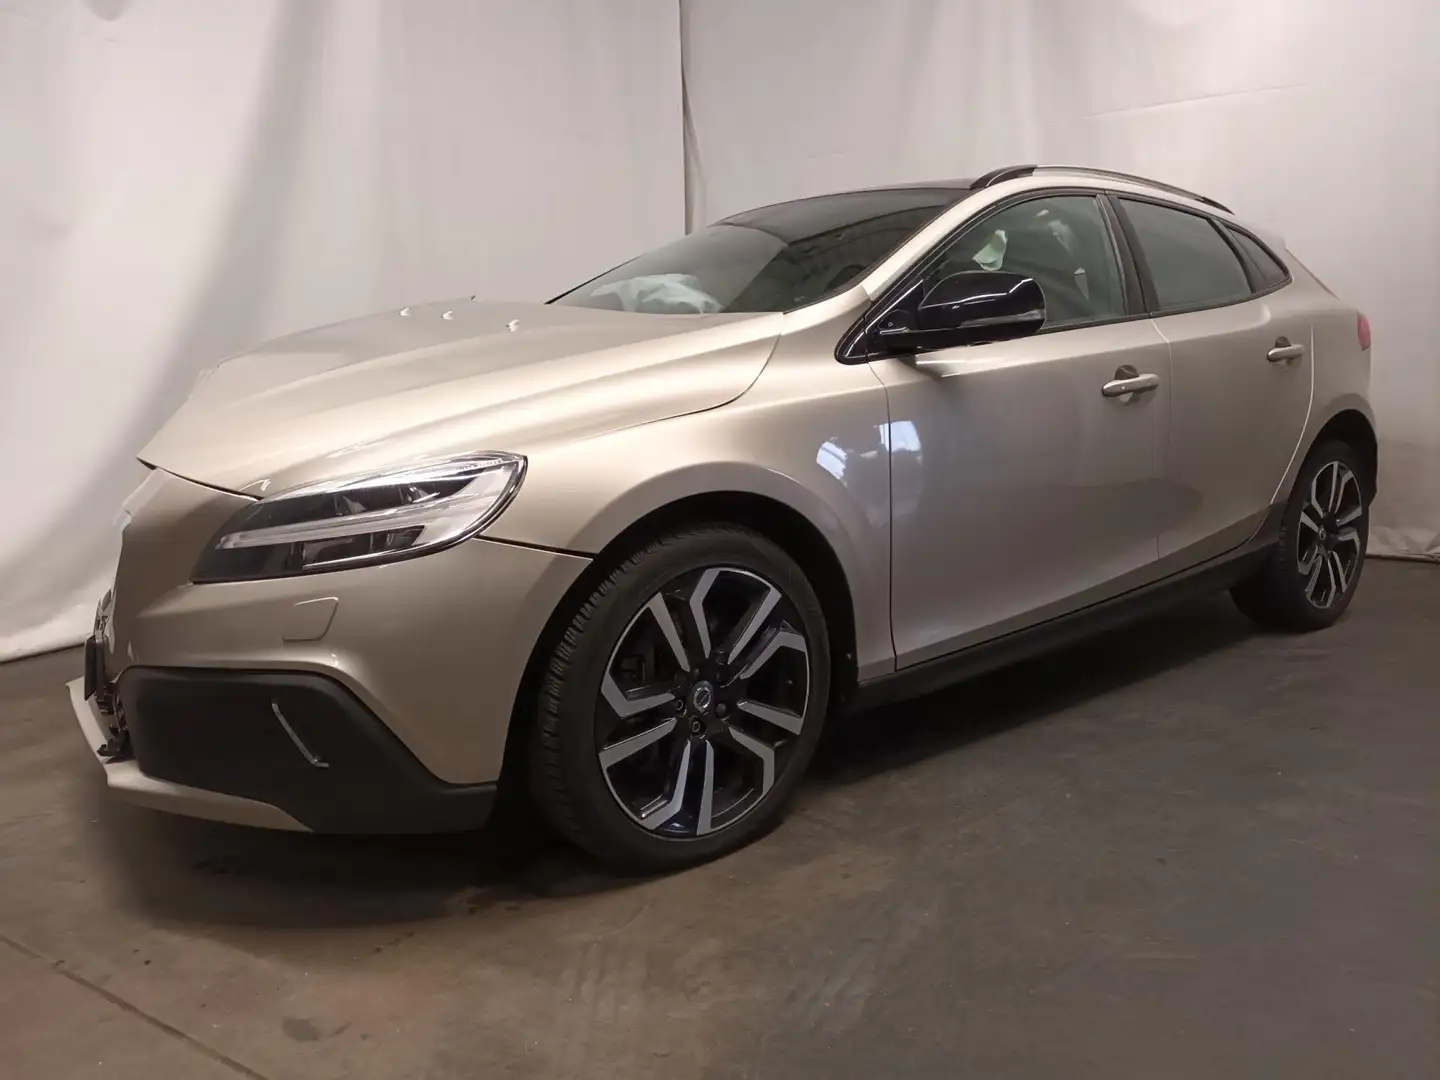 Volvo V40 Cross Country 1.5 T3 Nordic+ - Front Schade - Airbags Defect Maro - 2